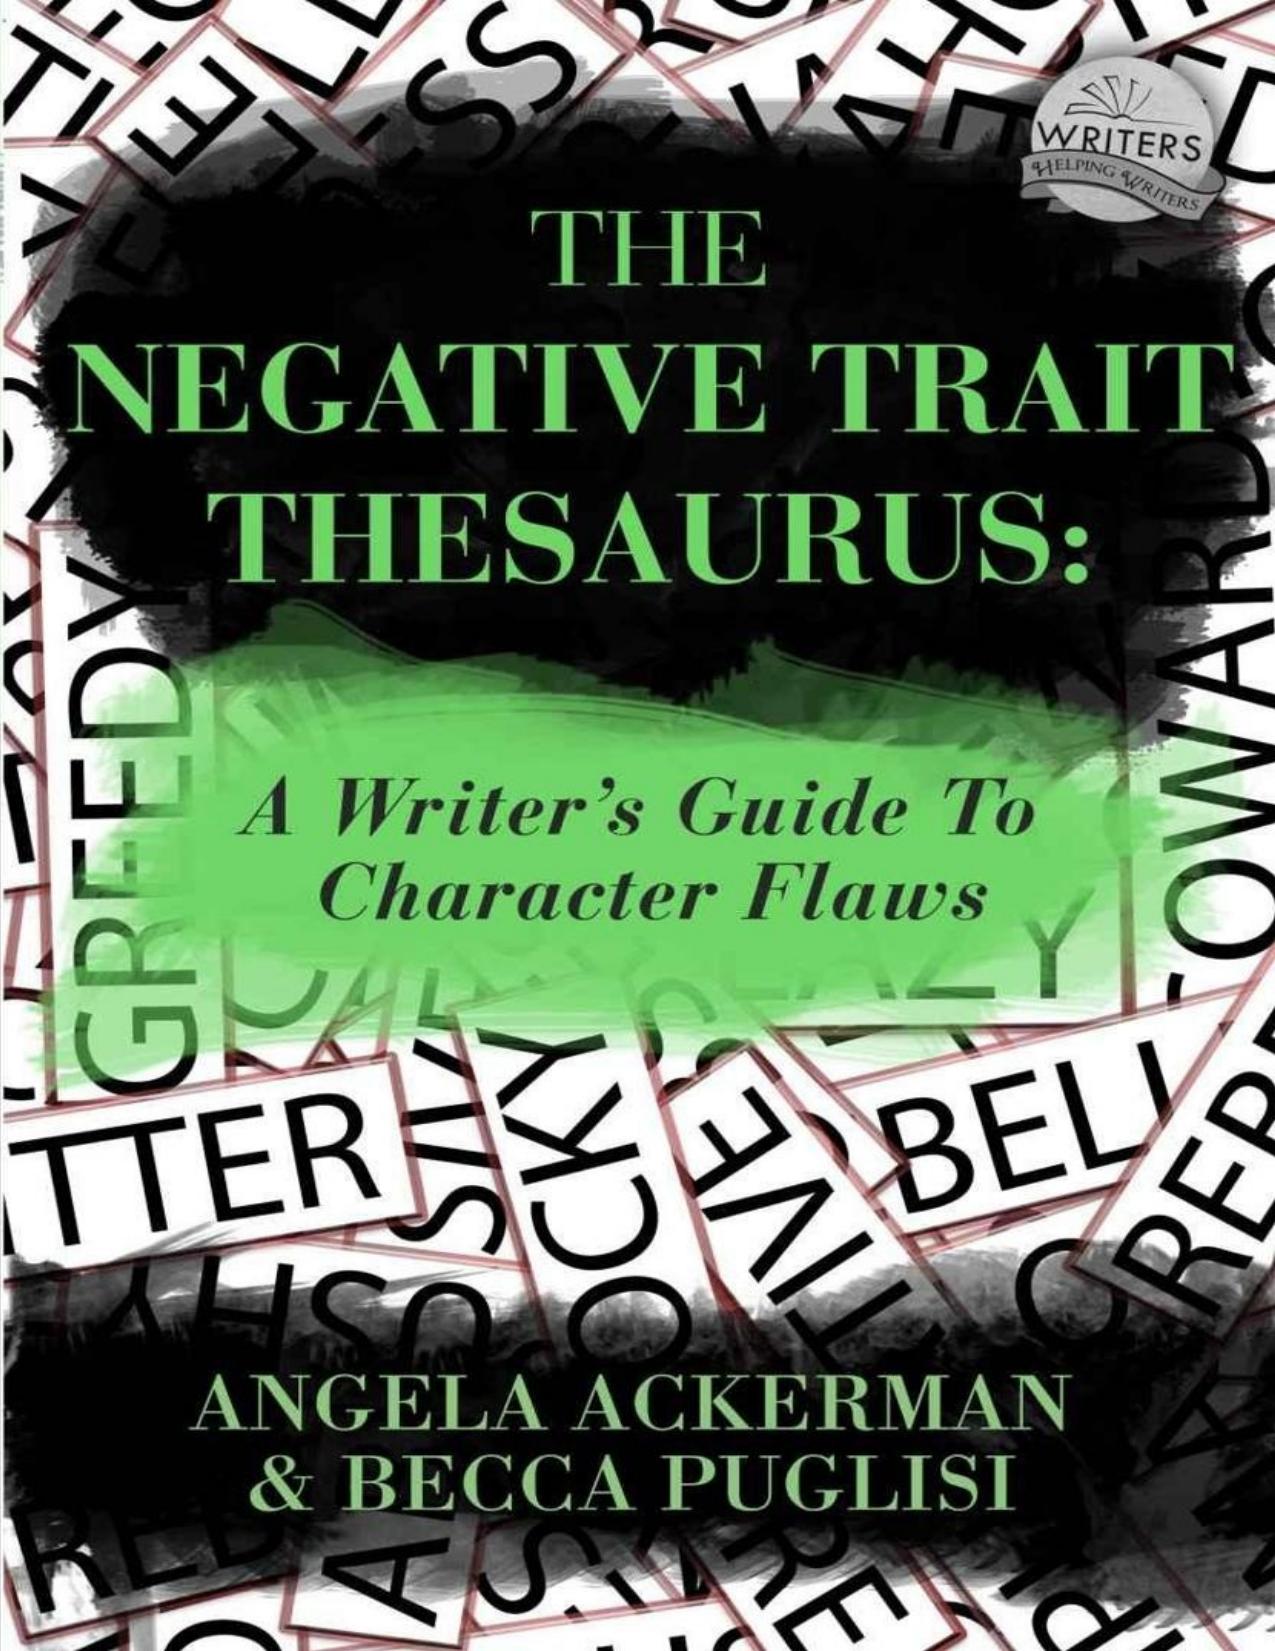 The Negative Trait Thesaurus: A Writer's Guide to Character Flaws by Angela Ackerman Becca Puglisi